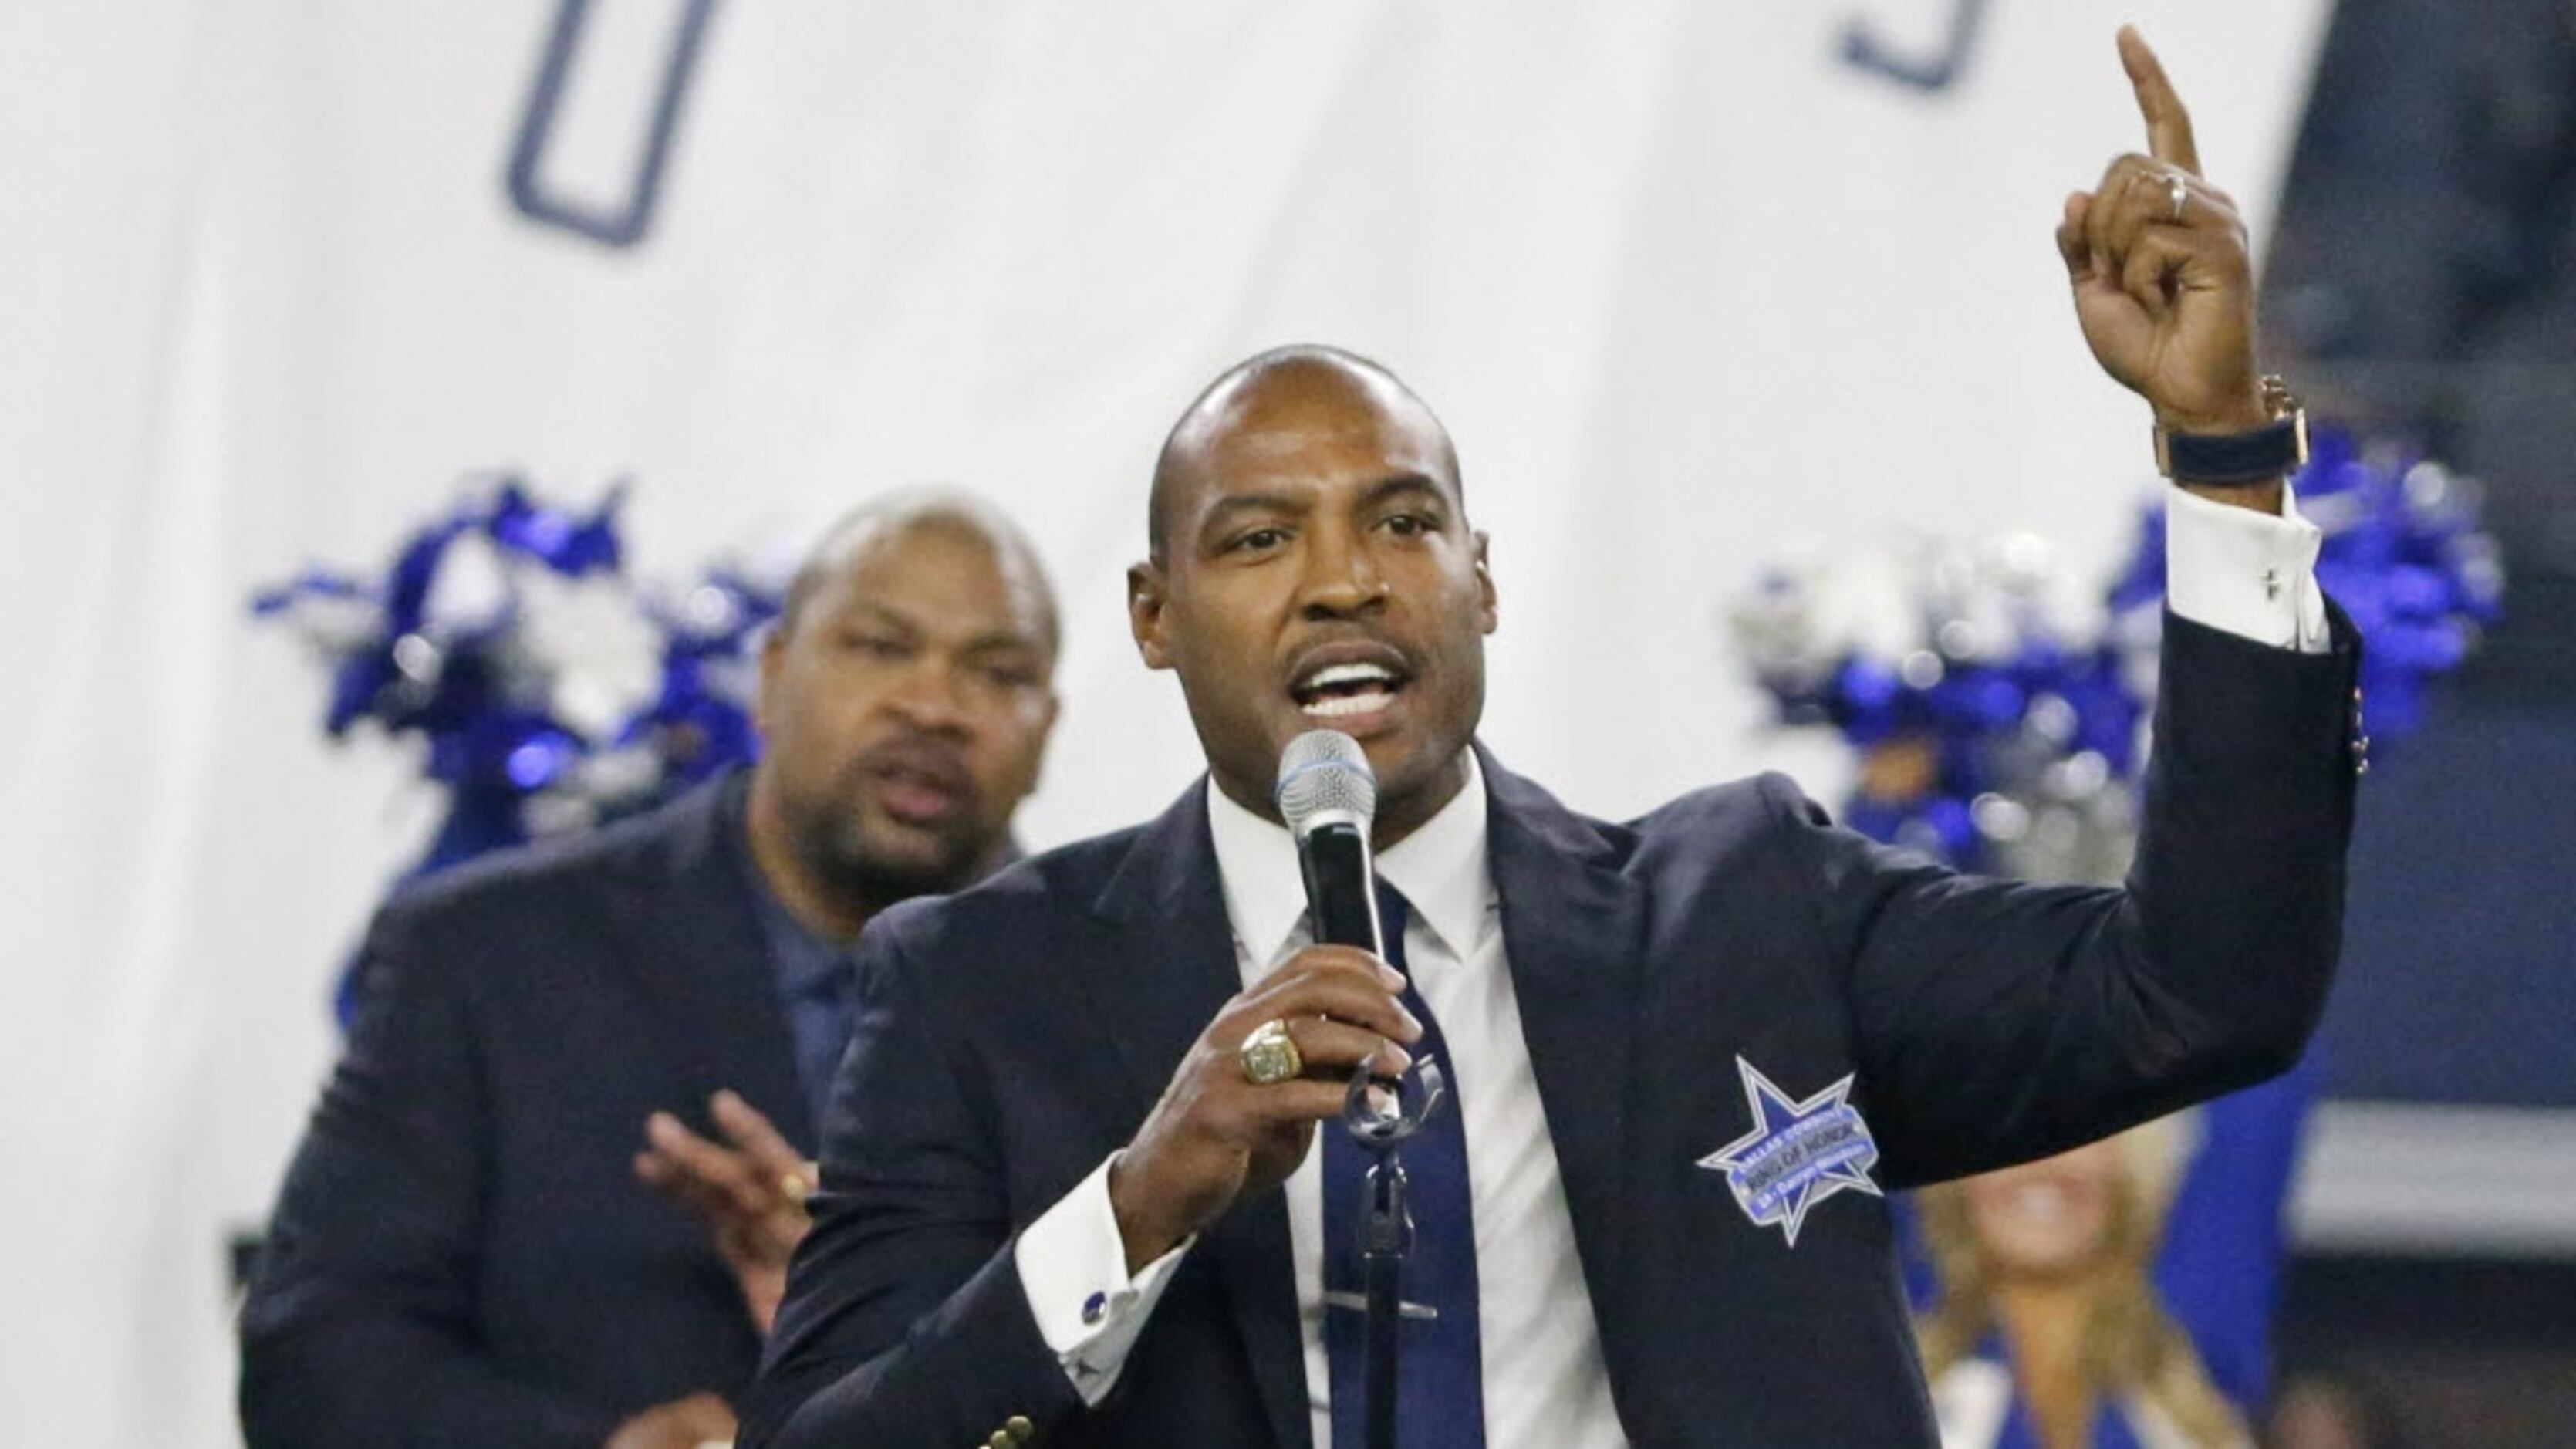 DeMarcus Ware, Darren Woodson among 2022 Hall of Fame semifinalists, Romo  out